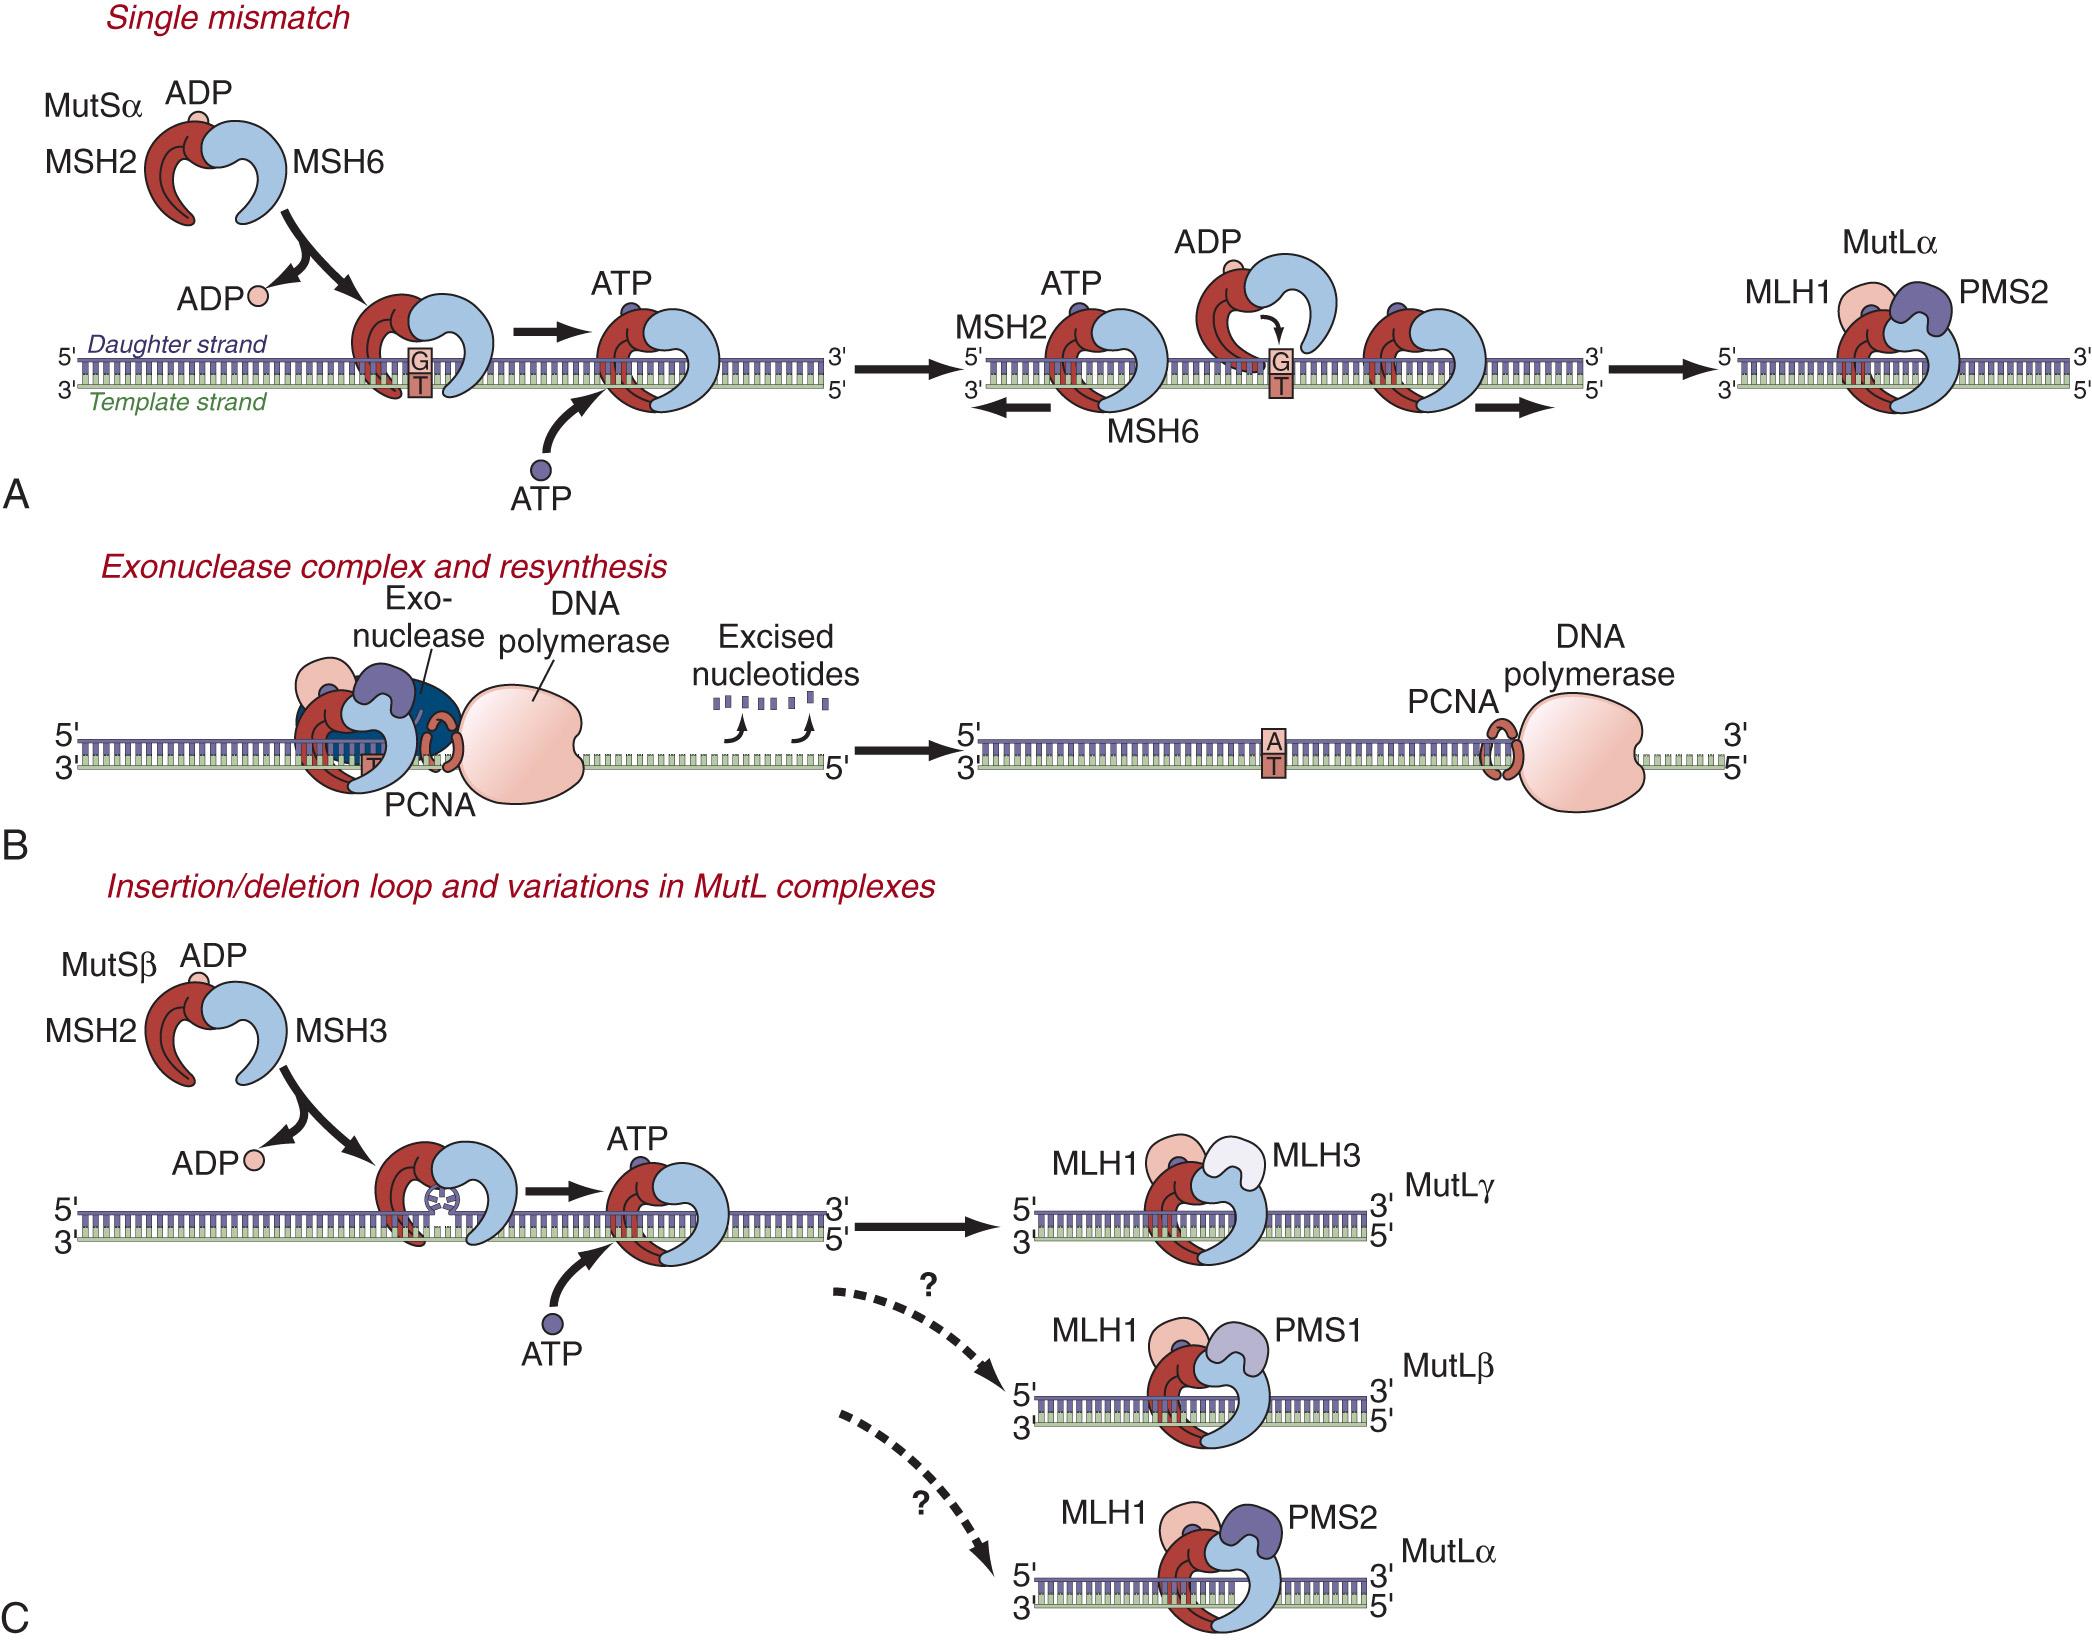 FIGURE 165.4, DNA mismatch repair (MMR). The DNA MMR system involves a series of cooperating enzymes. (A) The heterodimer of MSH2 and MSH6 proteins make up the MutSα mismatch recognition complex as shown. MutSα binds to DNA at random locations (with an exchange of ADP for ATP) and slides along the nascent DNA strand until it encounters a DNA mismatch, at which time the MutLα complex (made up of MLH1 and PMS2 proteins) is recruited. MutSα preferentially recognizes single base-pair mismatches and single base insertion-deletion lesions. (B) Exonuclease is recruited to the mismatch by MutSα and nucleotides are serially excised specifically from the daughter strand and the mismatch is excised. Then DNA polymerase resynthesizes the daughter strand. (C) The human MMR system broadens its specificity for mismatch recognition when MSH2 heterodimerizes with the MSH3 protein, forming MutSβ, which has additional specificity to recognize larger insertion-deletion loops containing 2 to 6 nucleotides. Also, MLH1 can heterodimerize with PMS1 (forming MutLβ) or MLH3 (forming MutLγ), but the precise roles of these complexes is incompletely understood. ADP , Adenosine diphosphate; ATP , adenosine triphosphate.